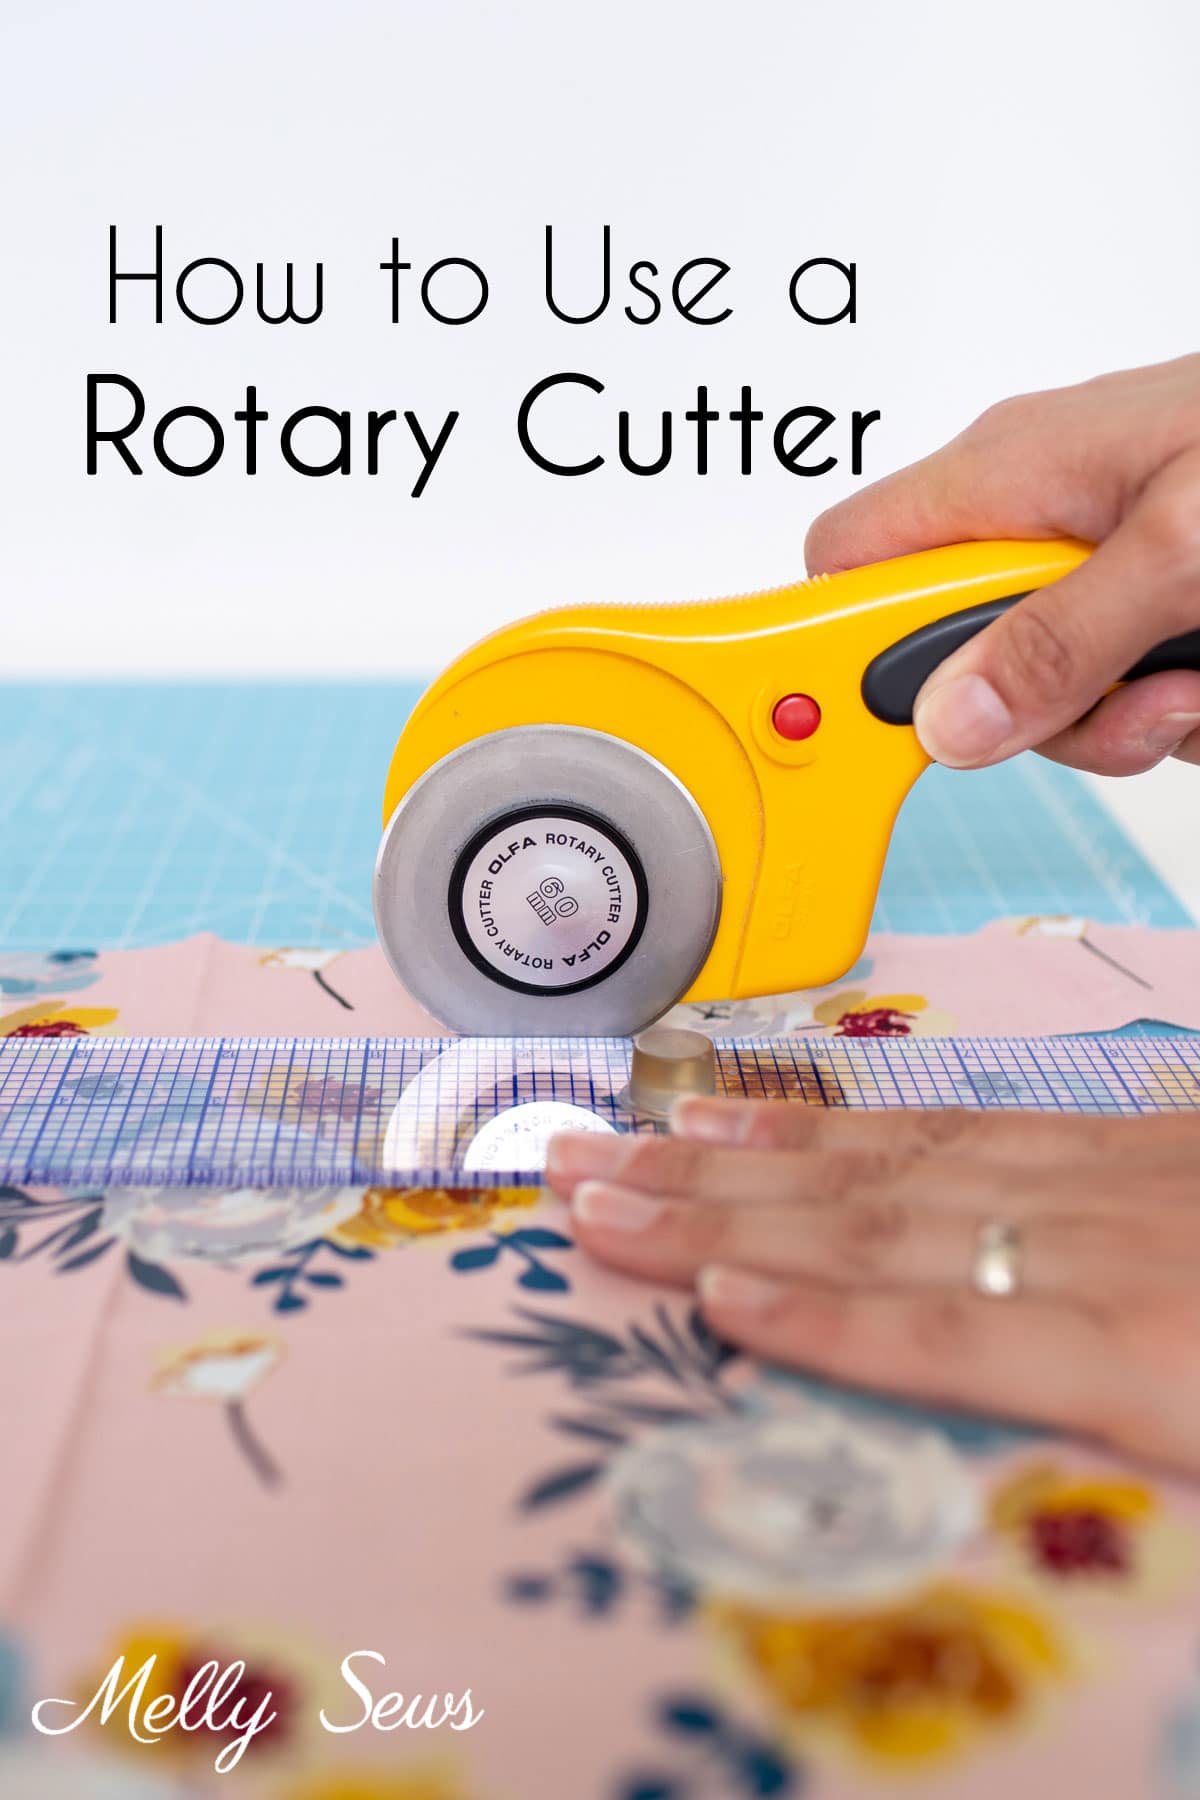 15 Tips for cutting fabric with a rotary cutter